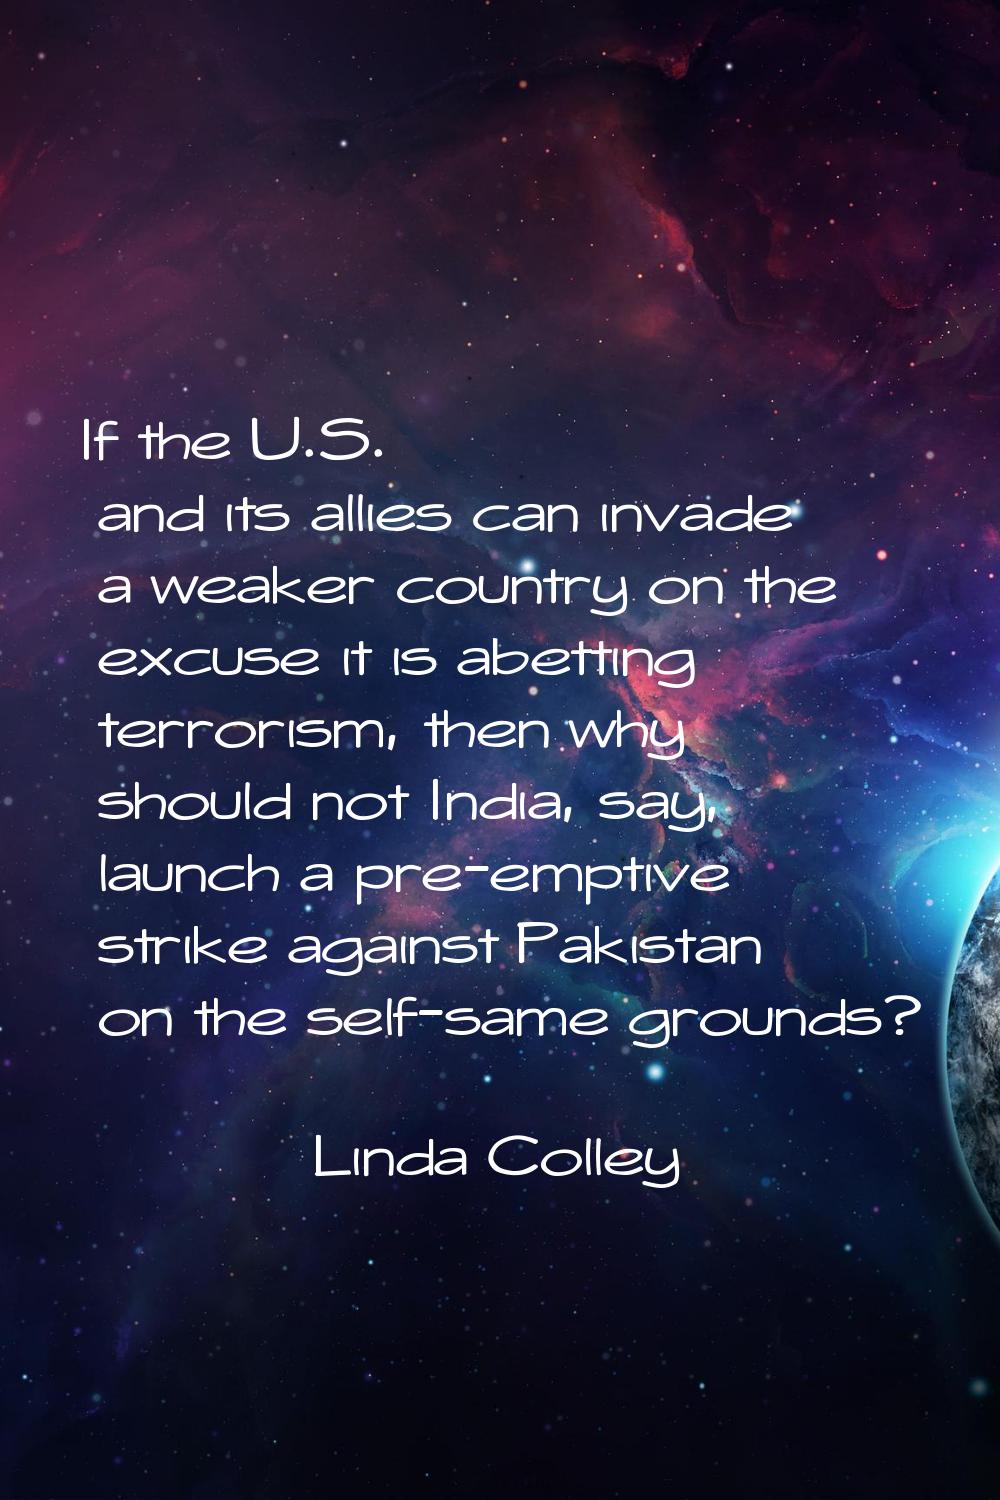 If the U.S. and its allies can invade a weaker country on the excuse it is abetting terrorism, then